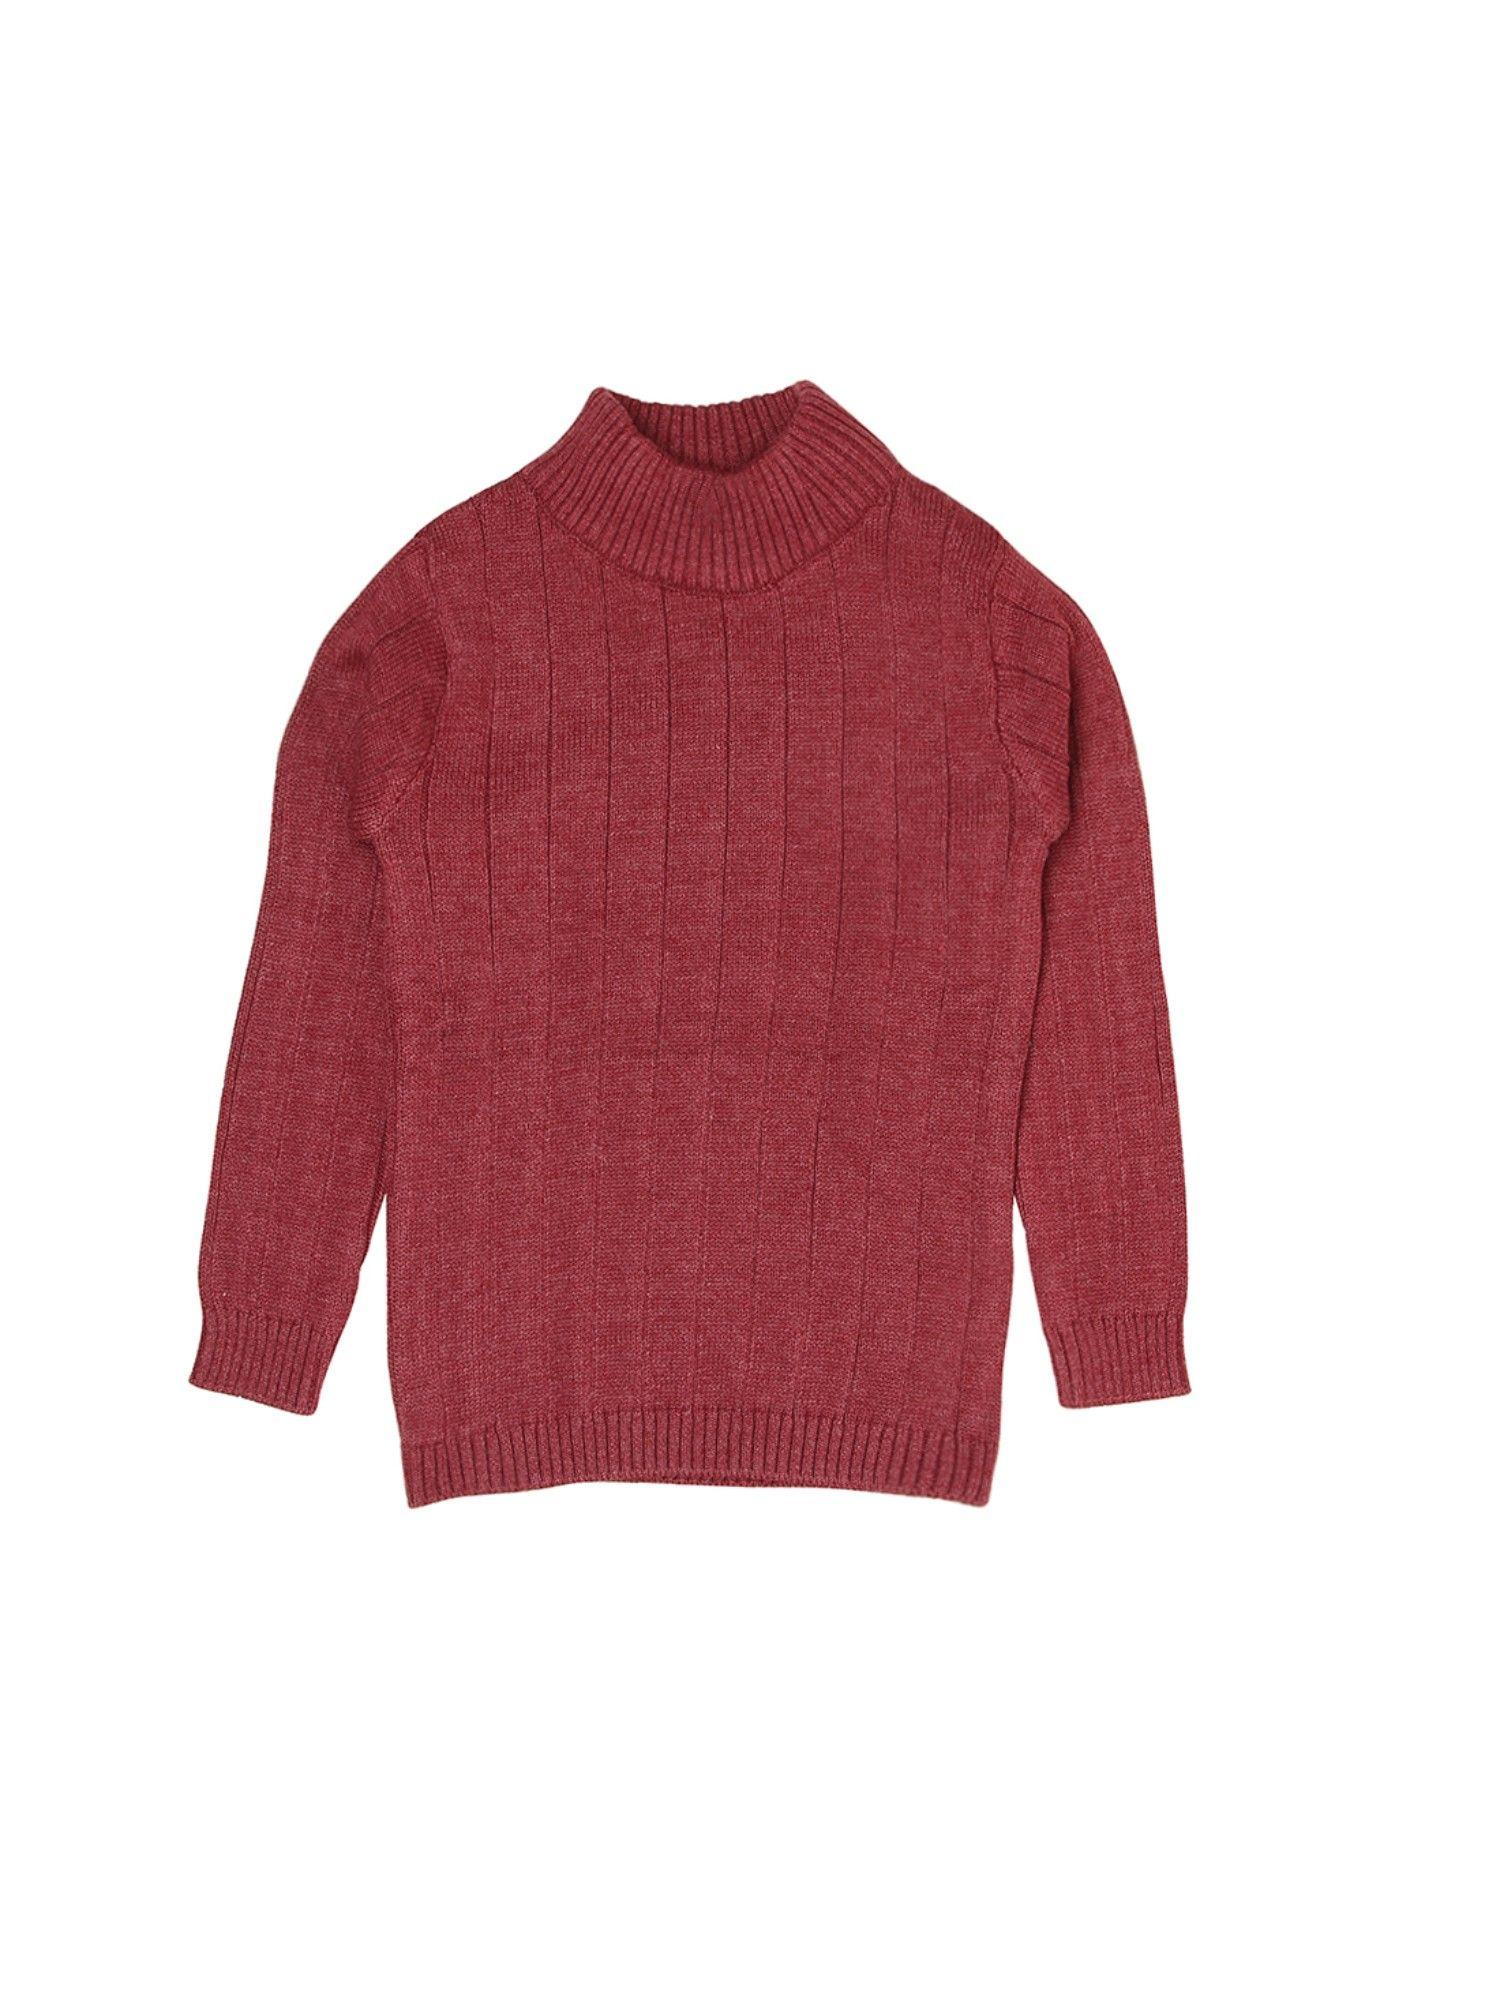 girls-solid-maroon-sweater